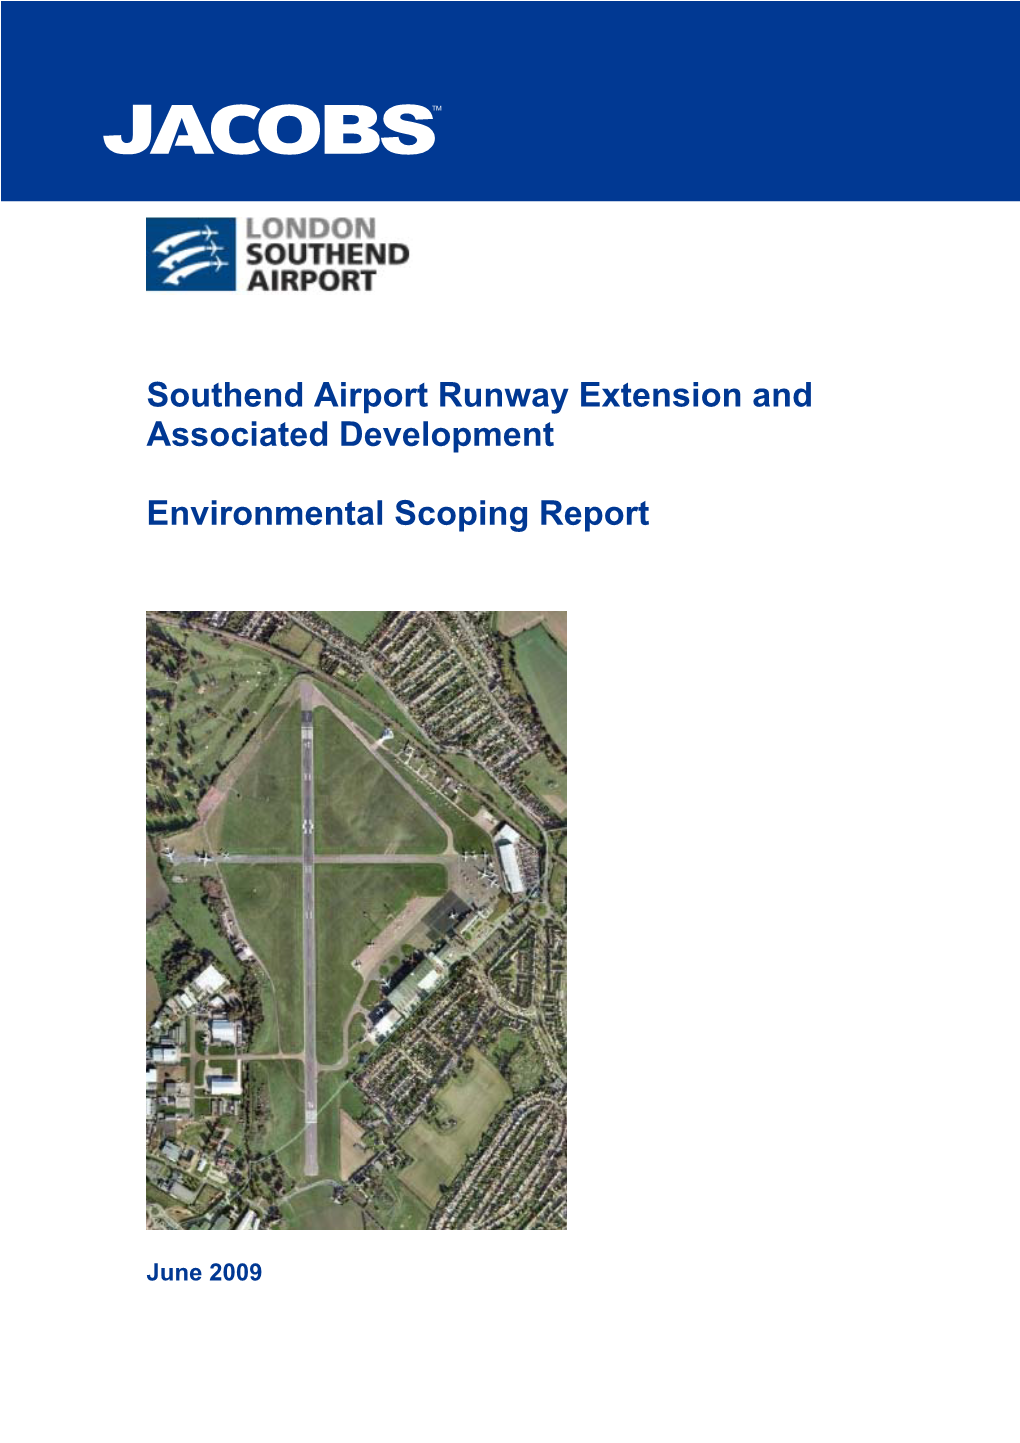 Southend Airport Runway Extension and Associated Development